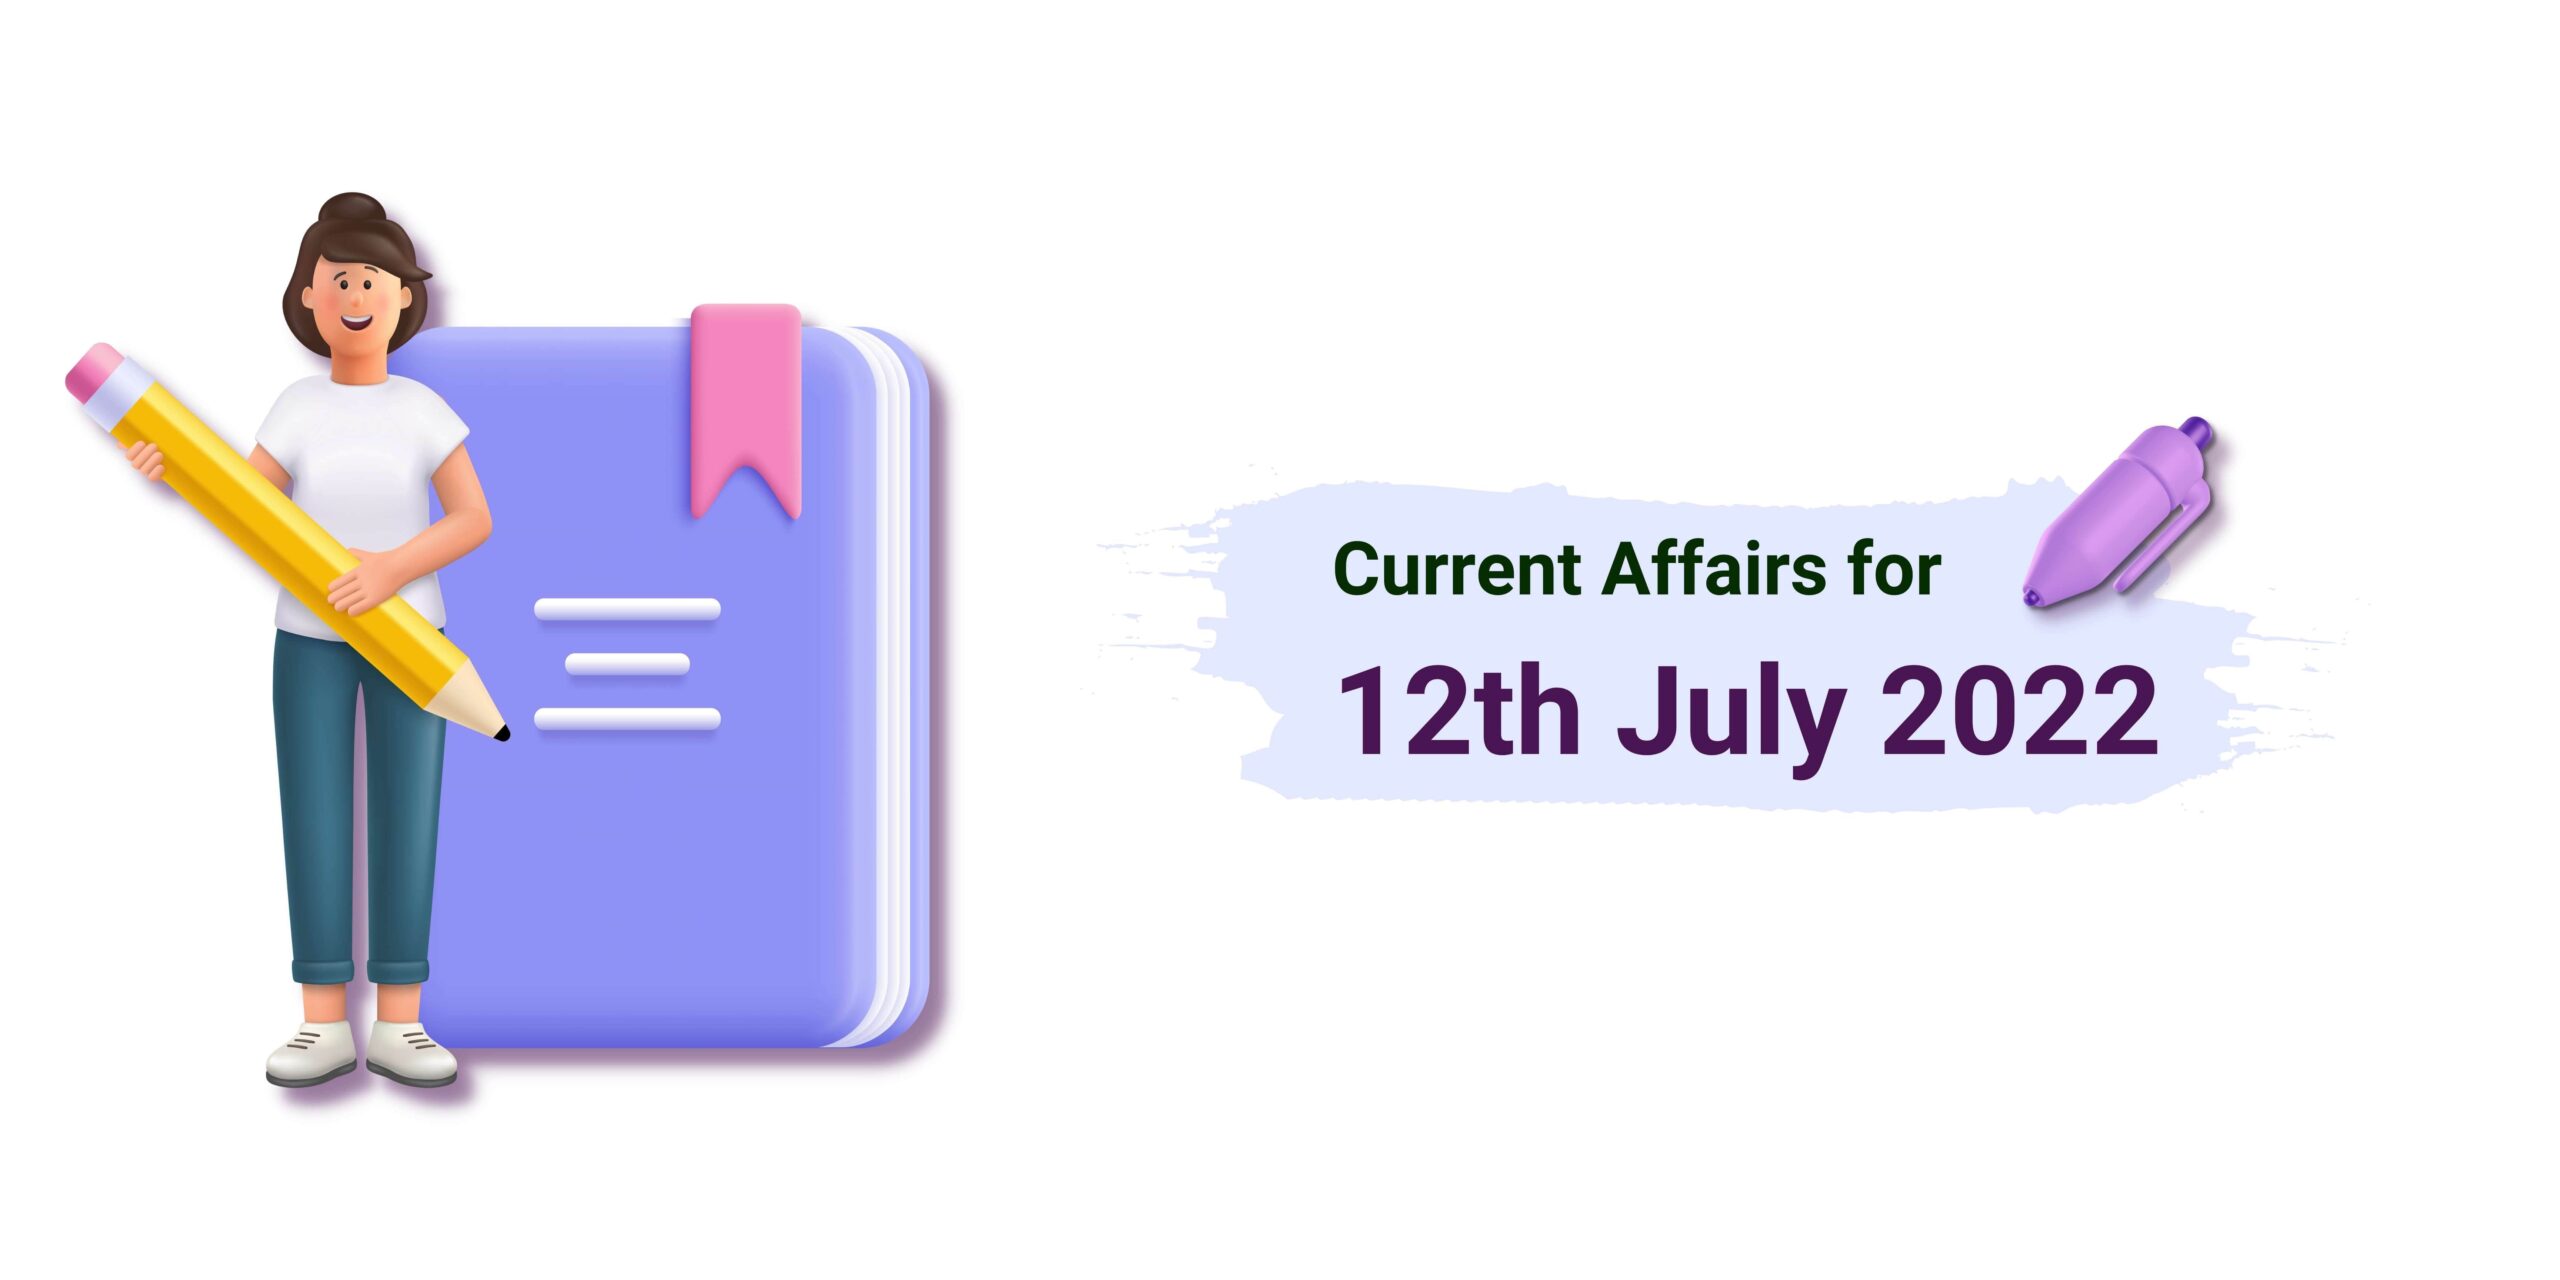 Current Affairs 12th July 2022